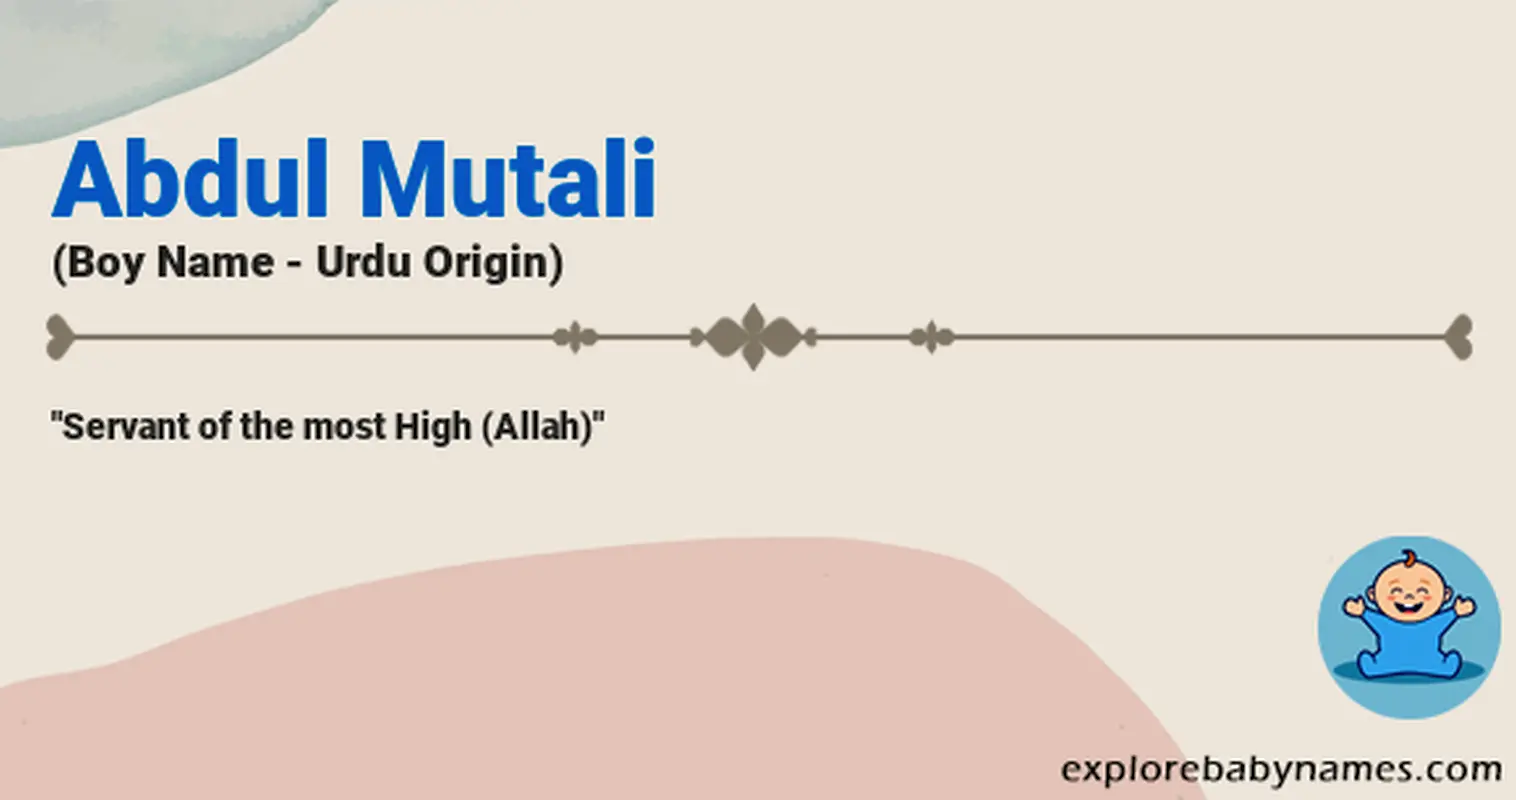 Meaning of Abdul Mutali